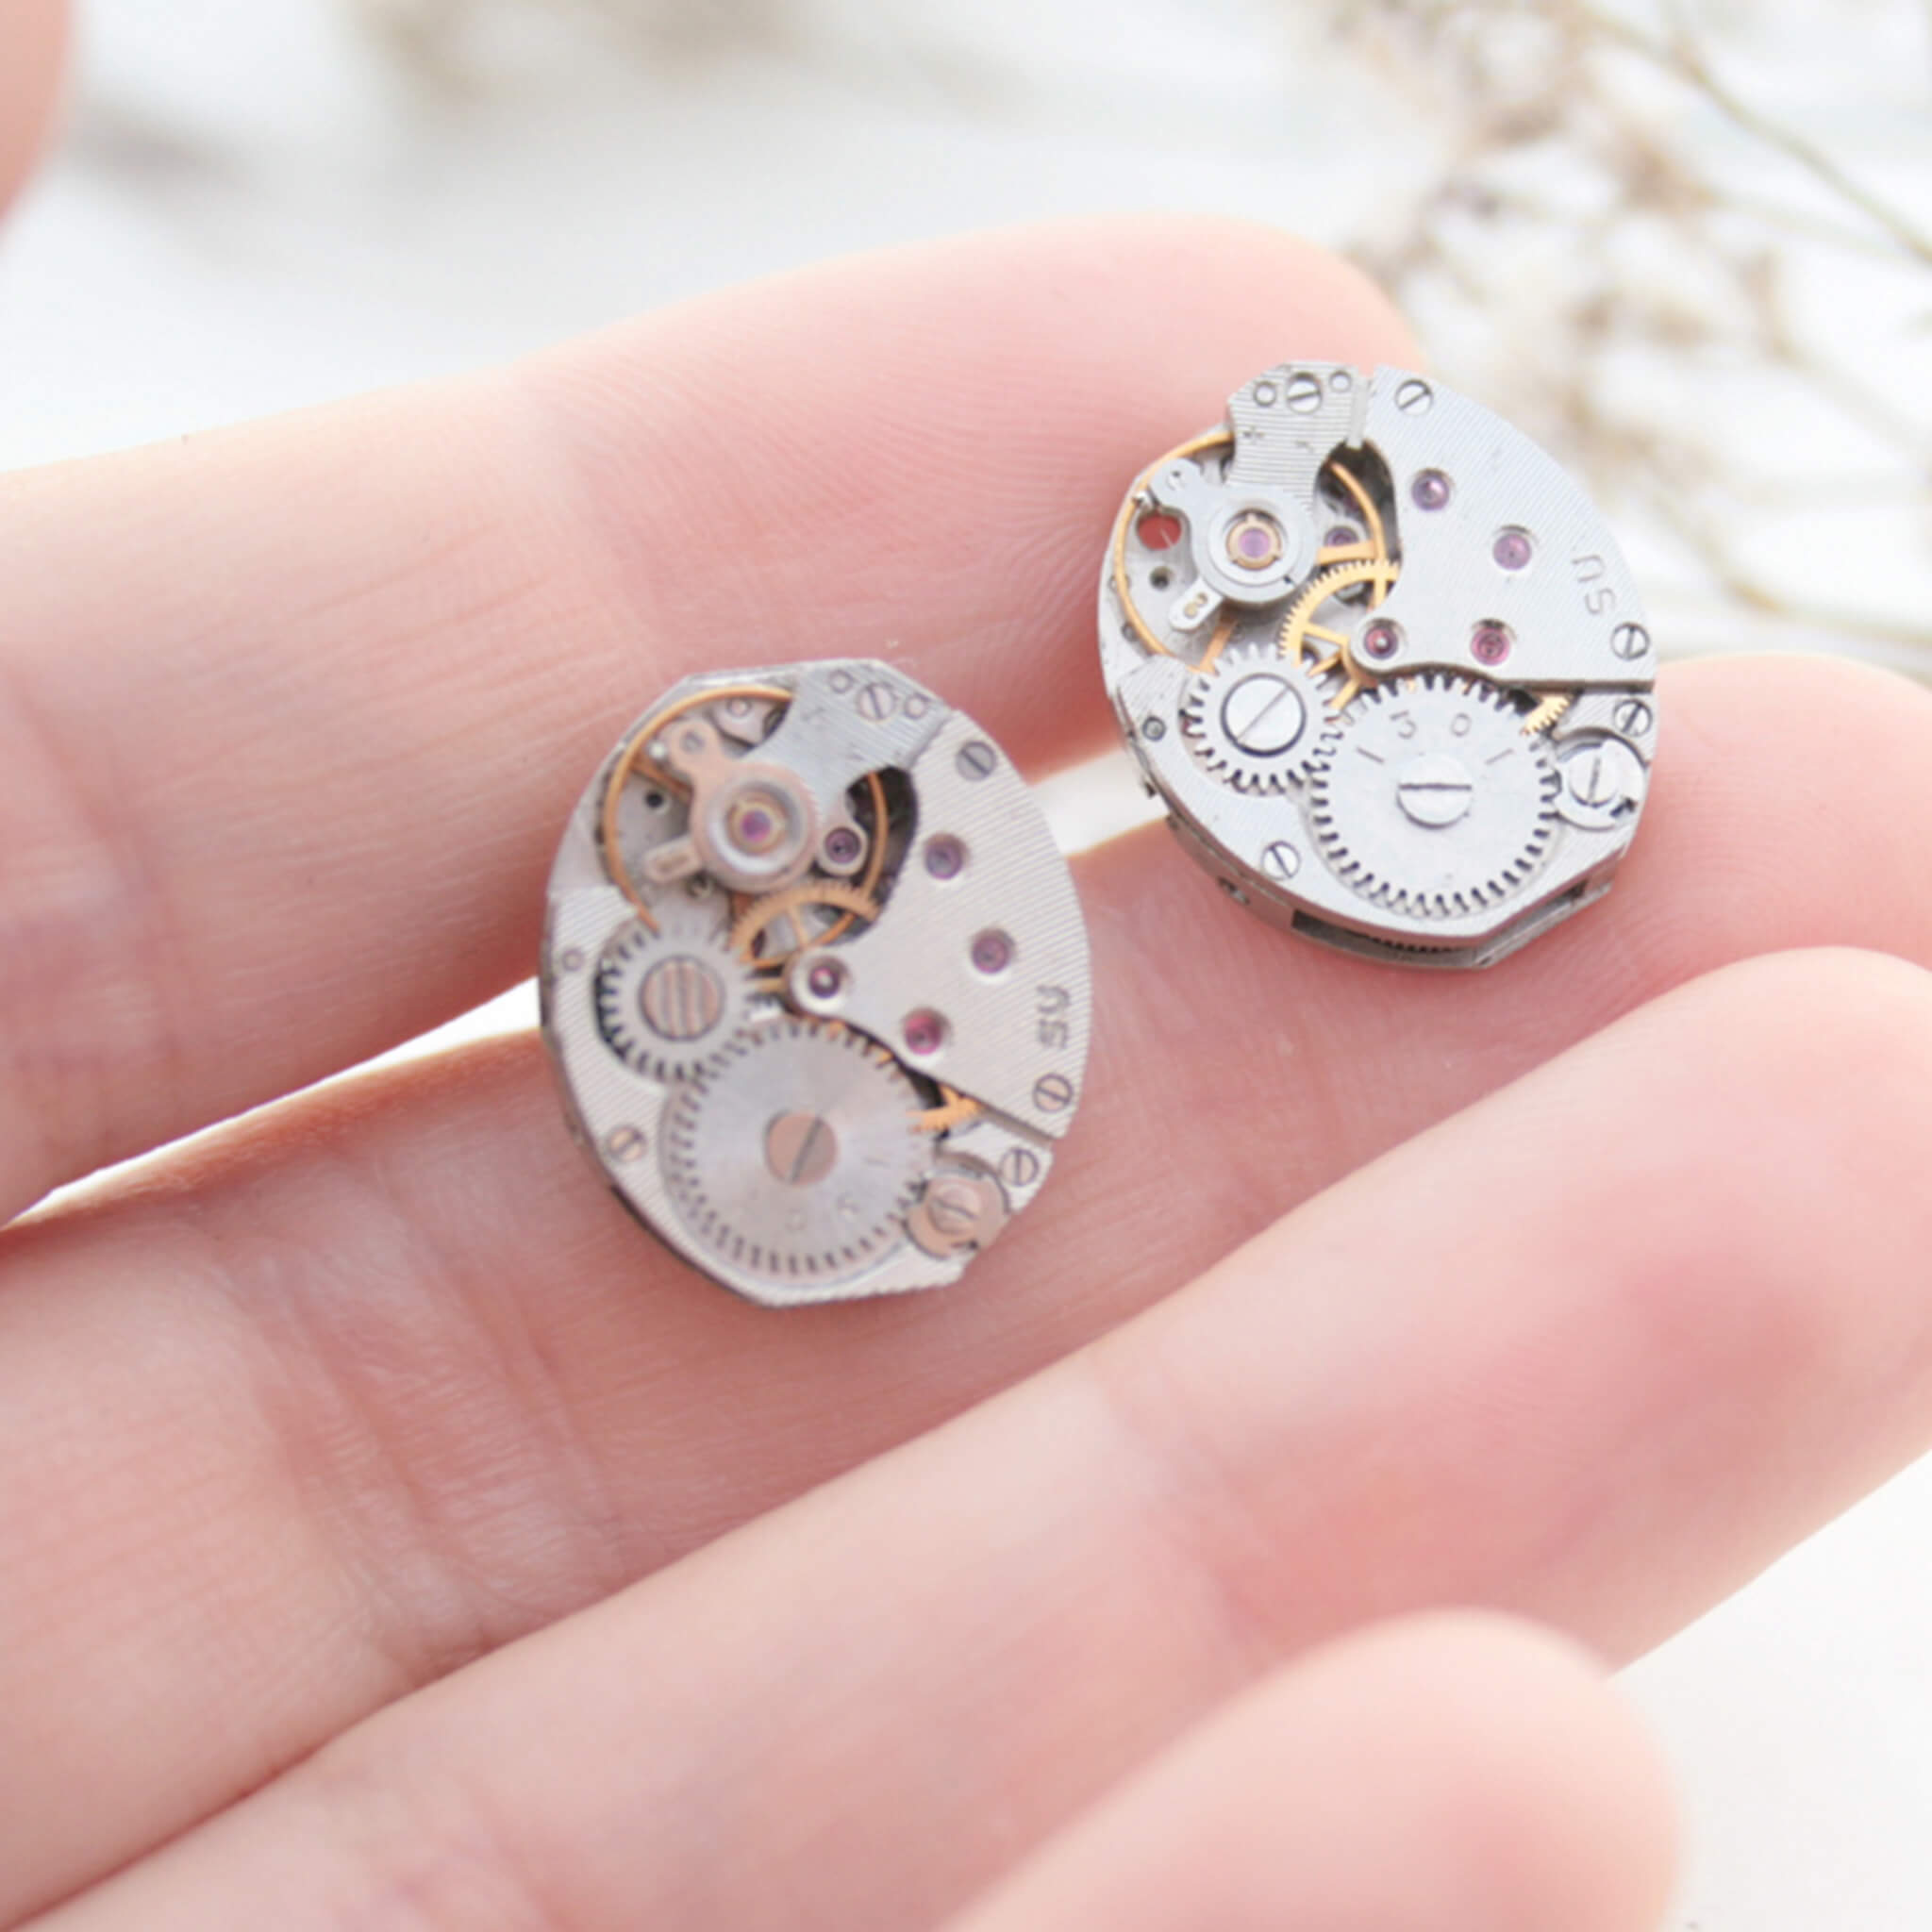 watch movements turned into stud earrings being hold in hand